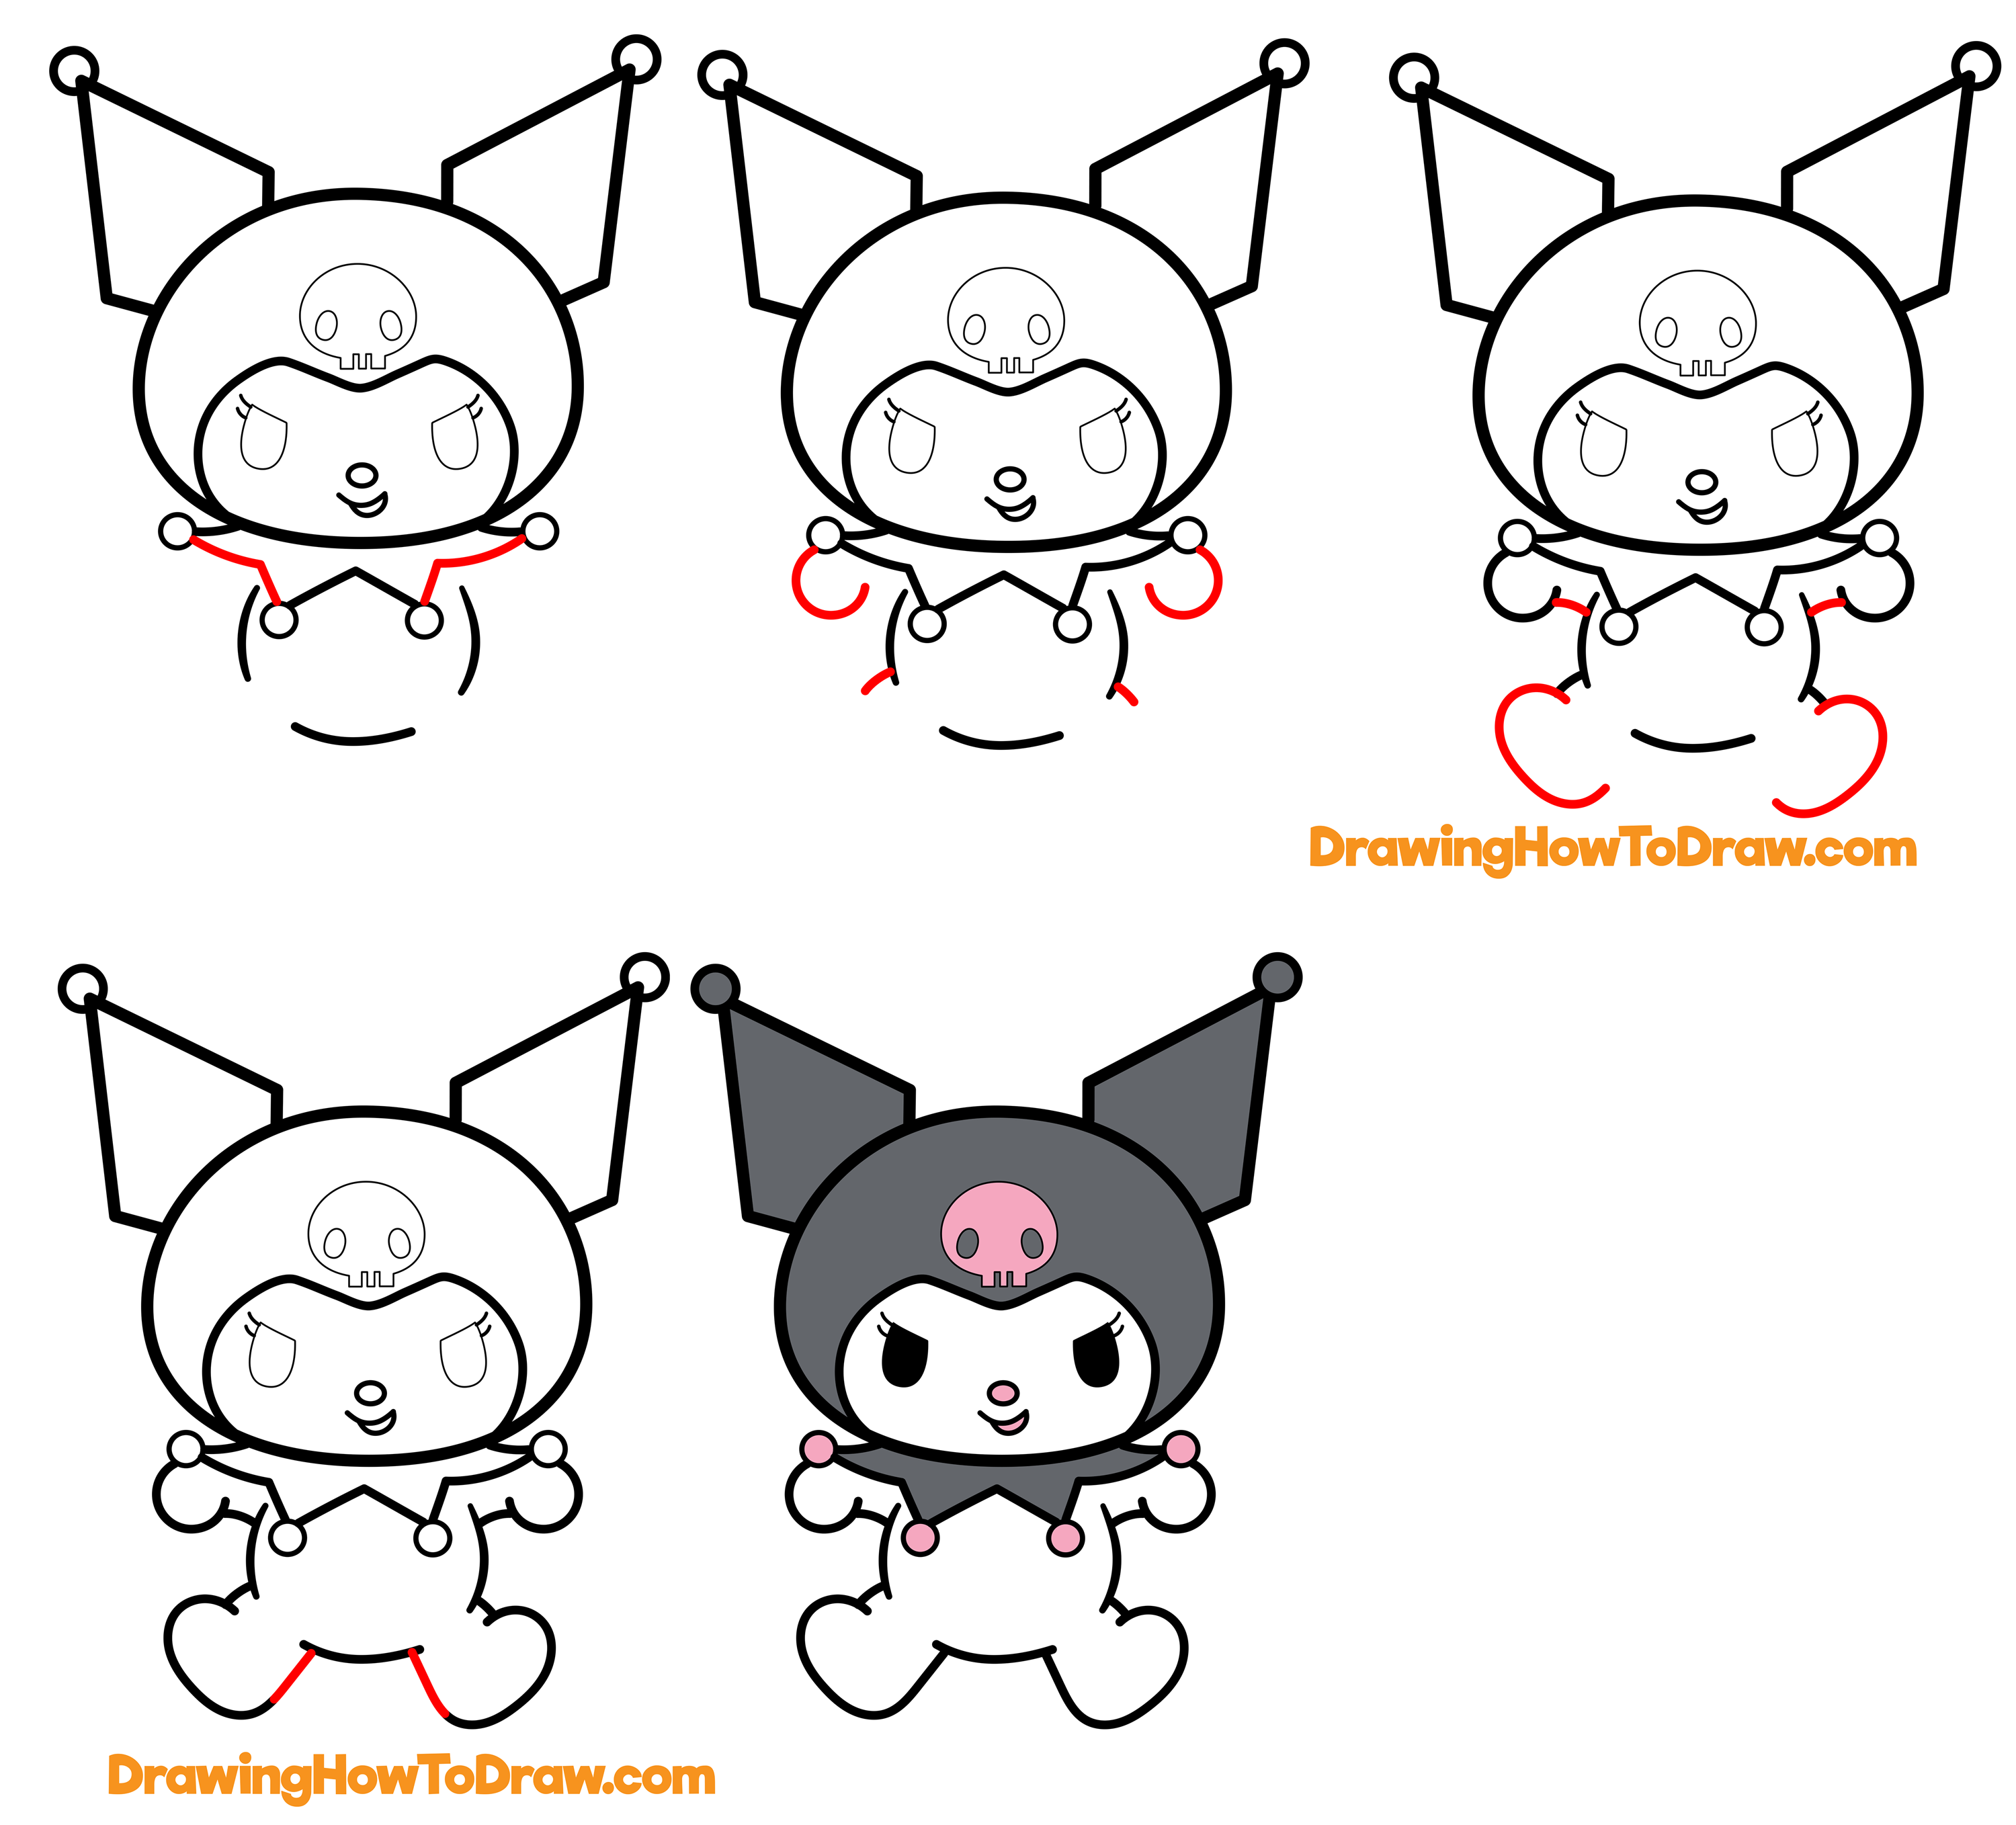 How to draw hello kitty - B+C Guides